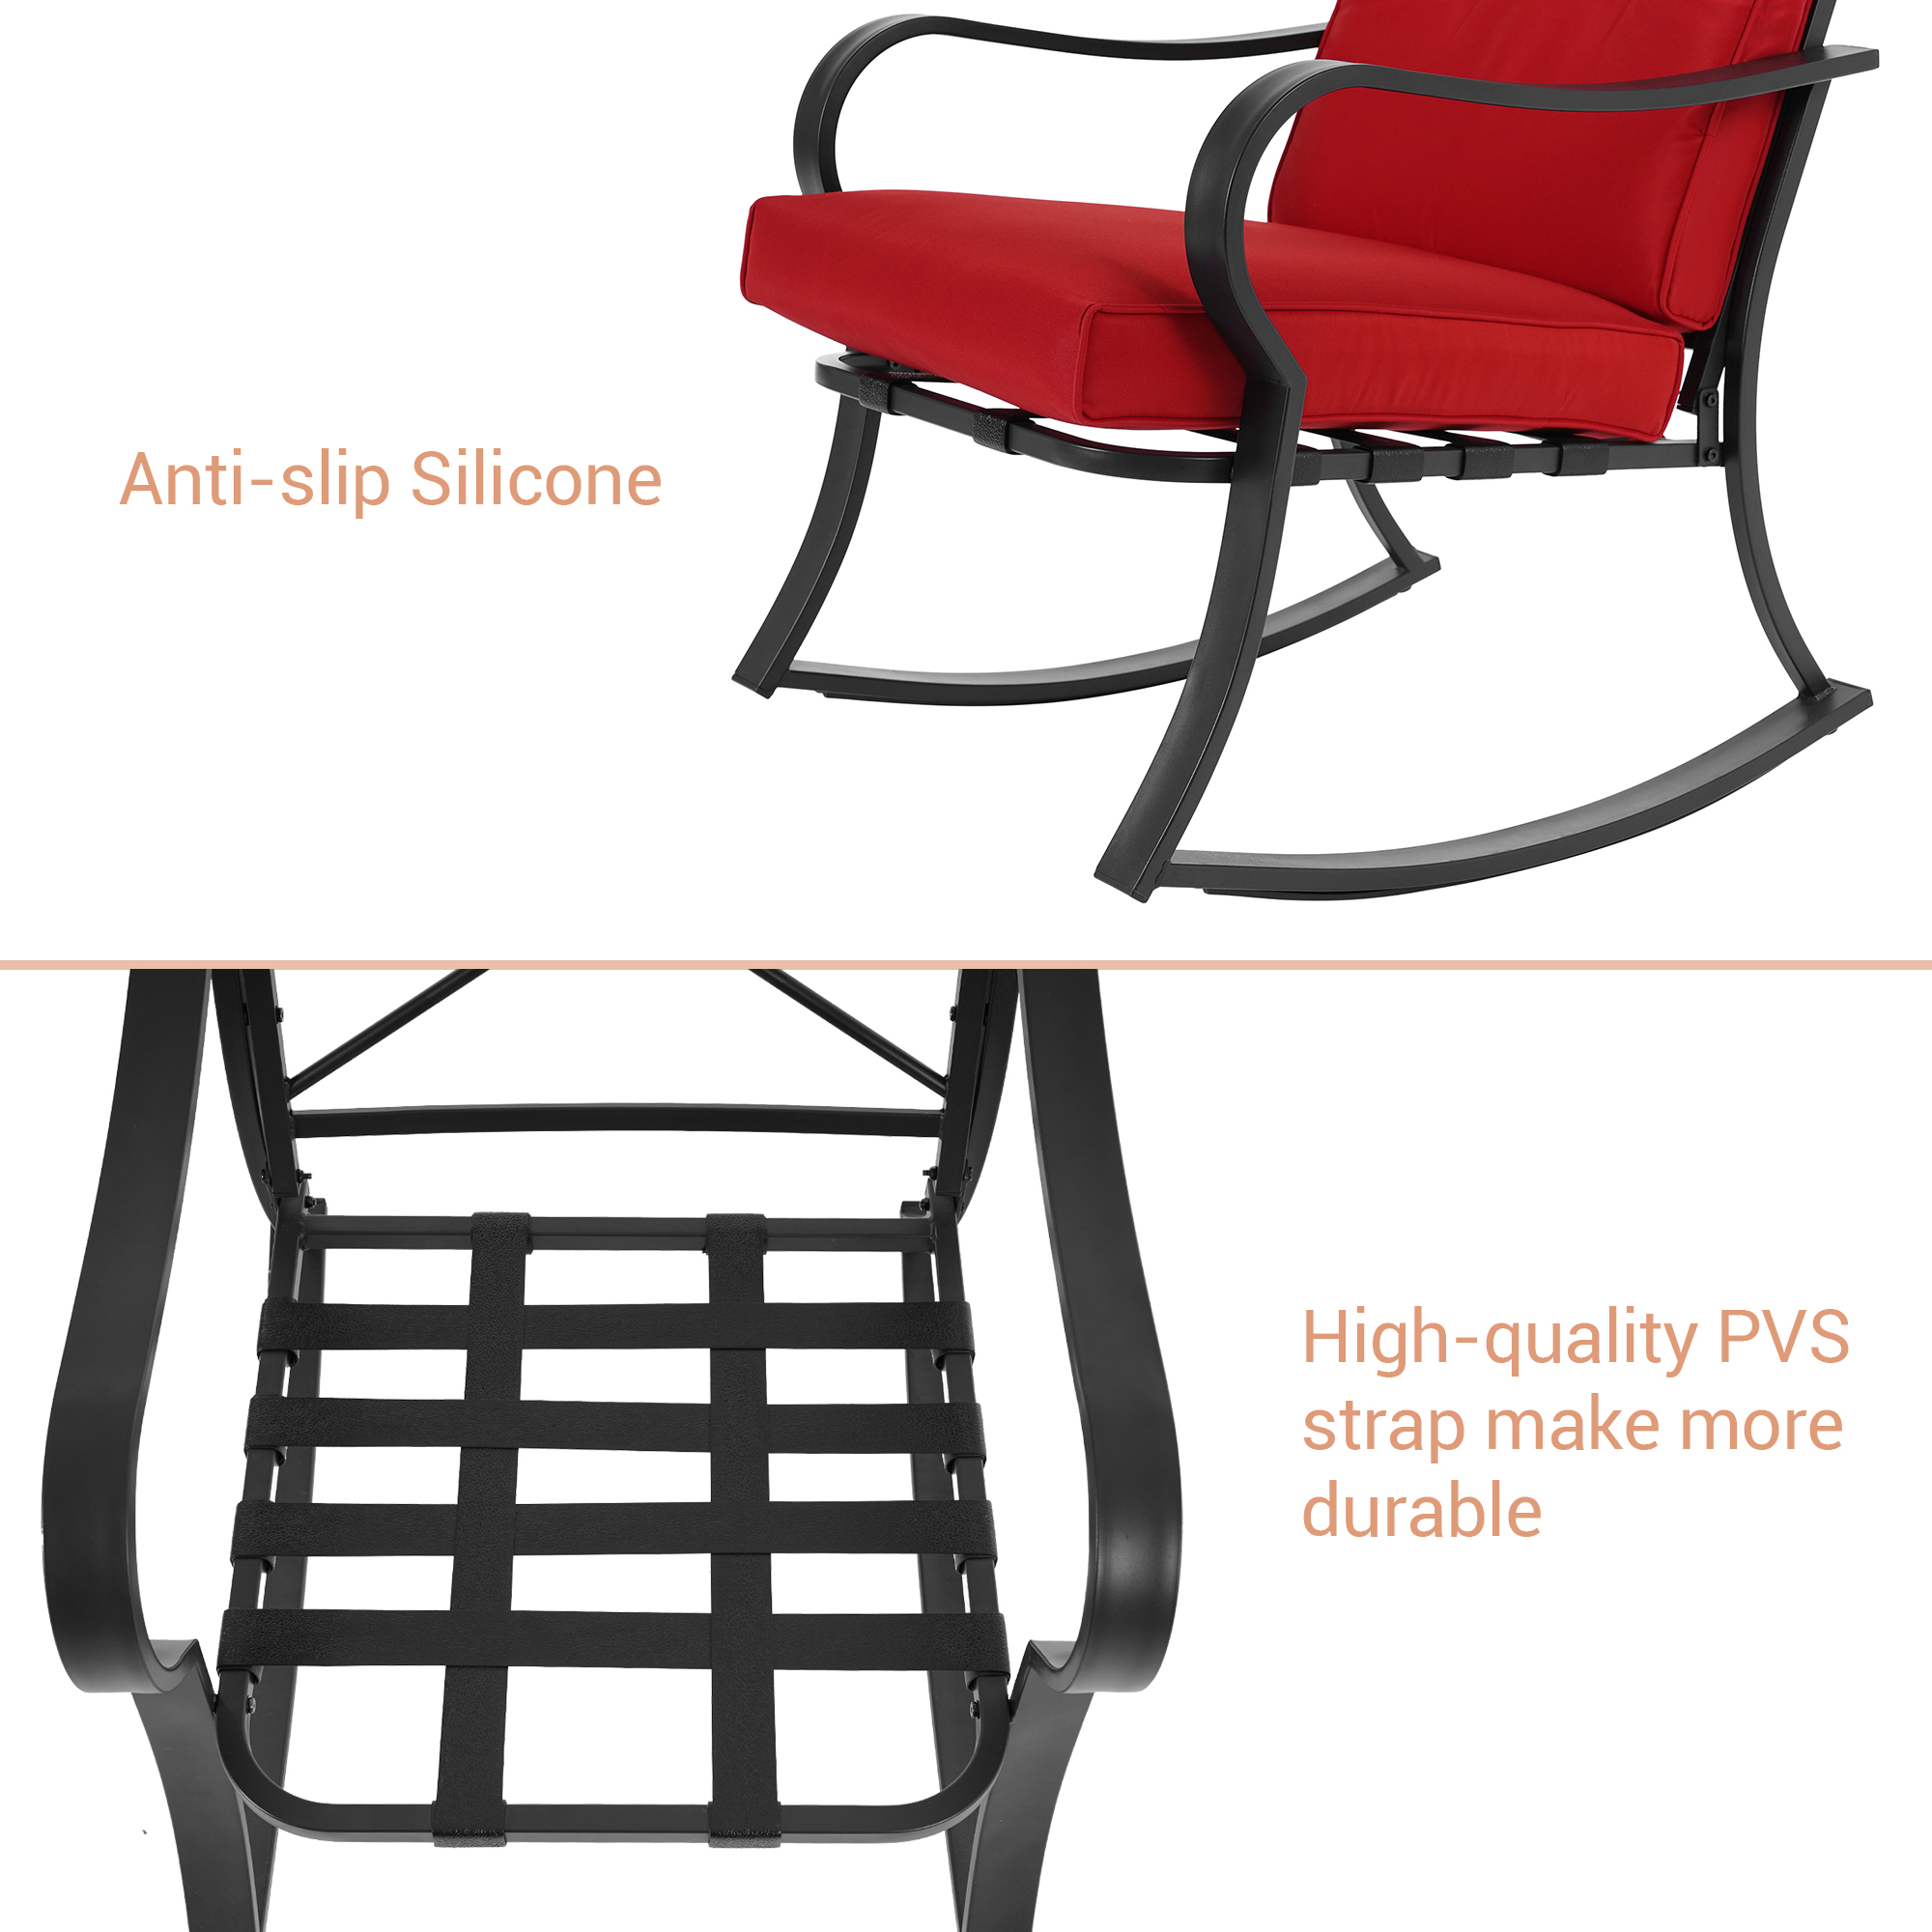 Outdoor Lounge Chair Courtyard Rocking Chair 3-Piece Steel Frame Outdoor Furniture Sets Thick Cushion Red Double Armchair Deck Backyard Bistro Set - image 2 of 8